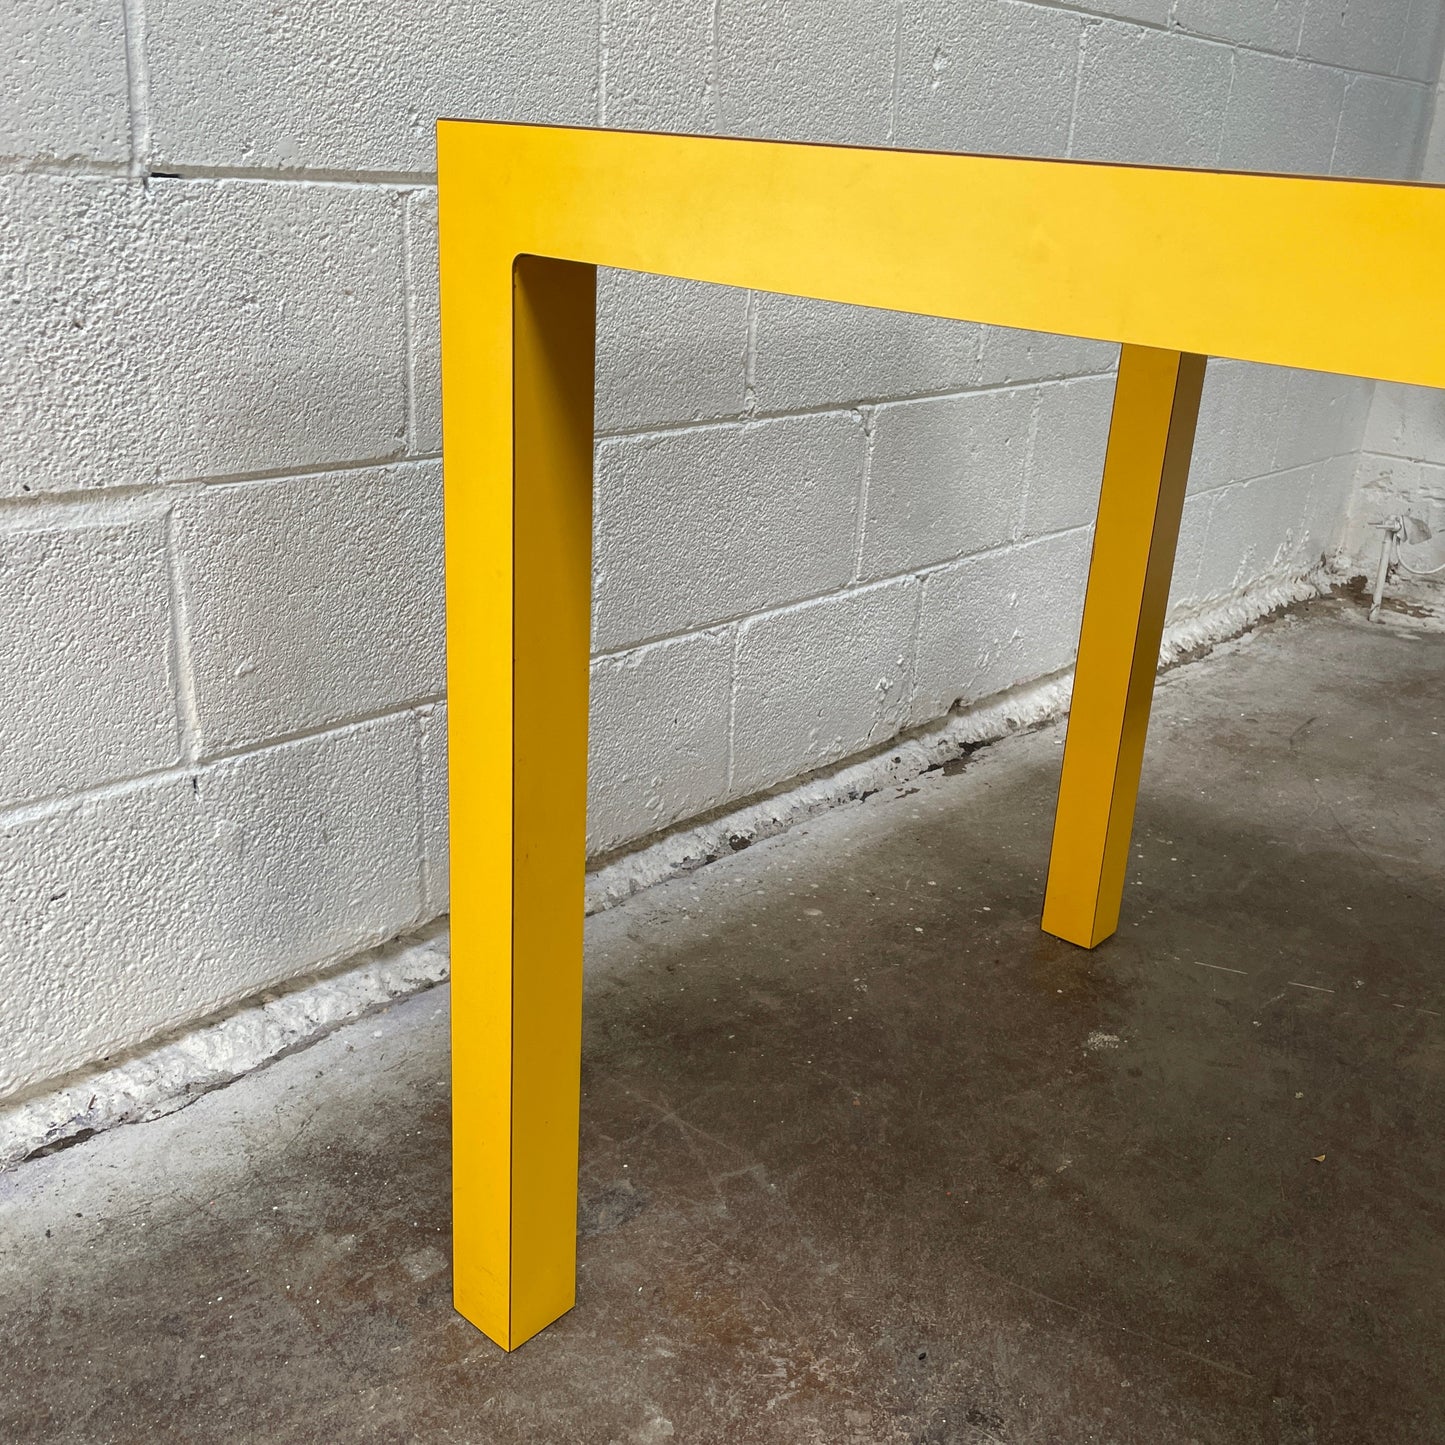 Yellow Laminate Dining Table